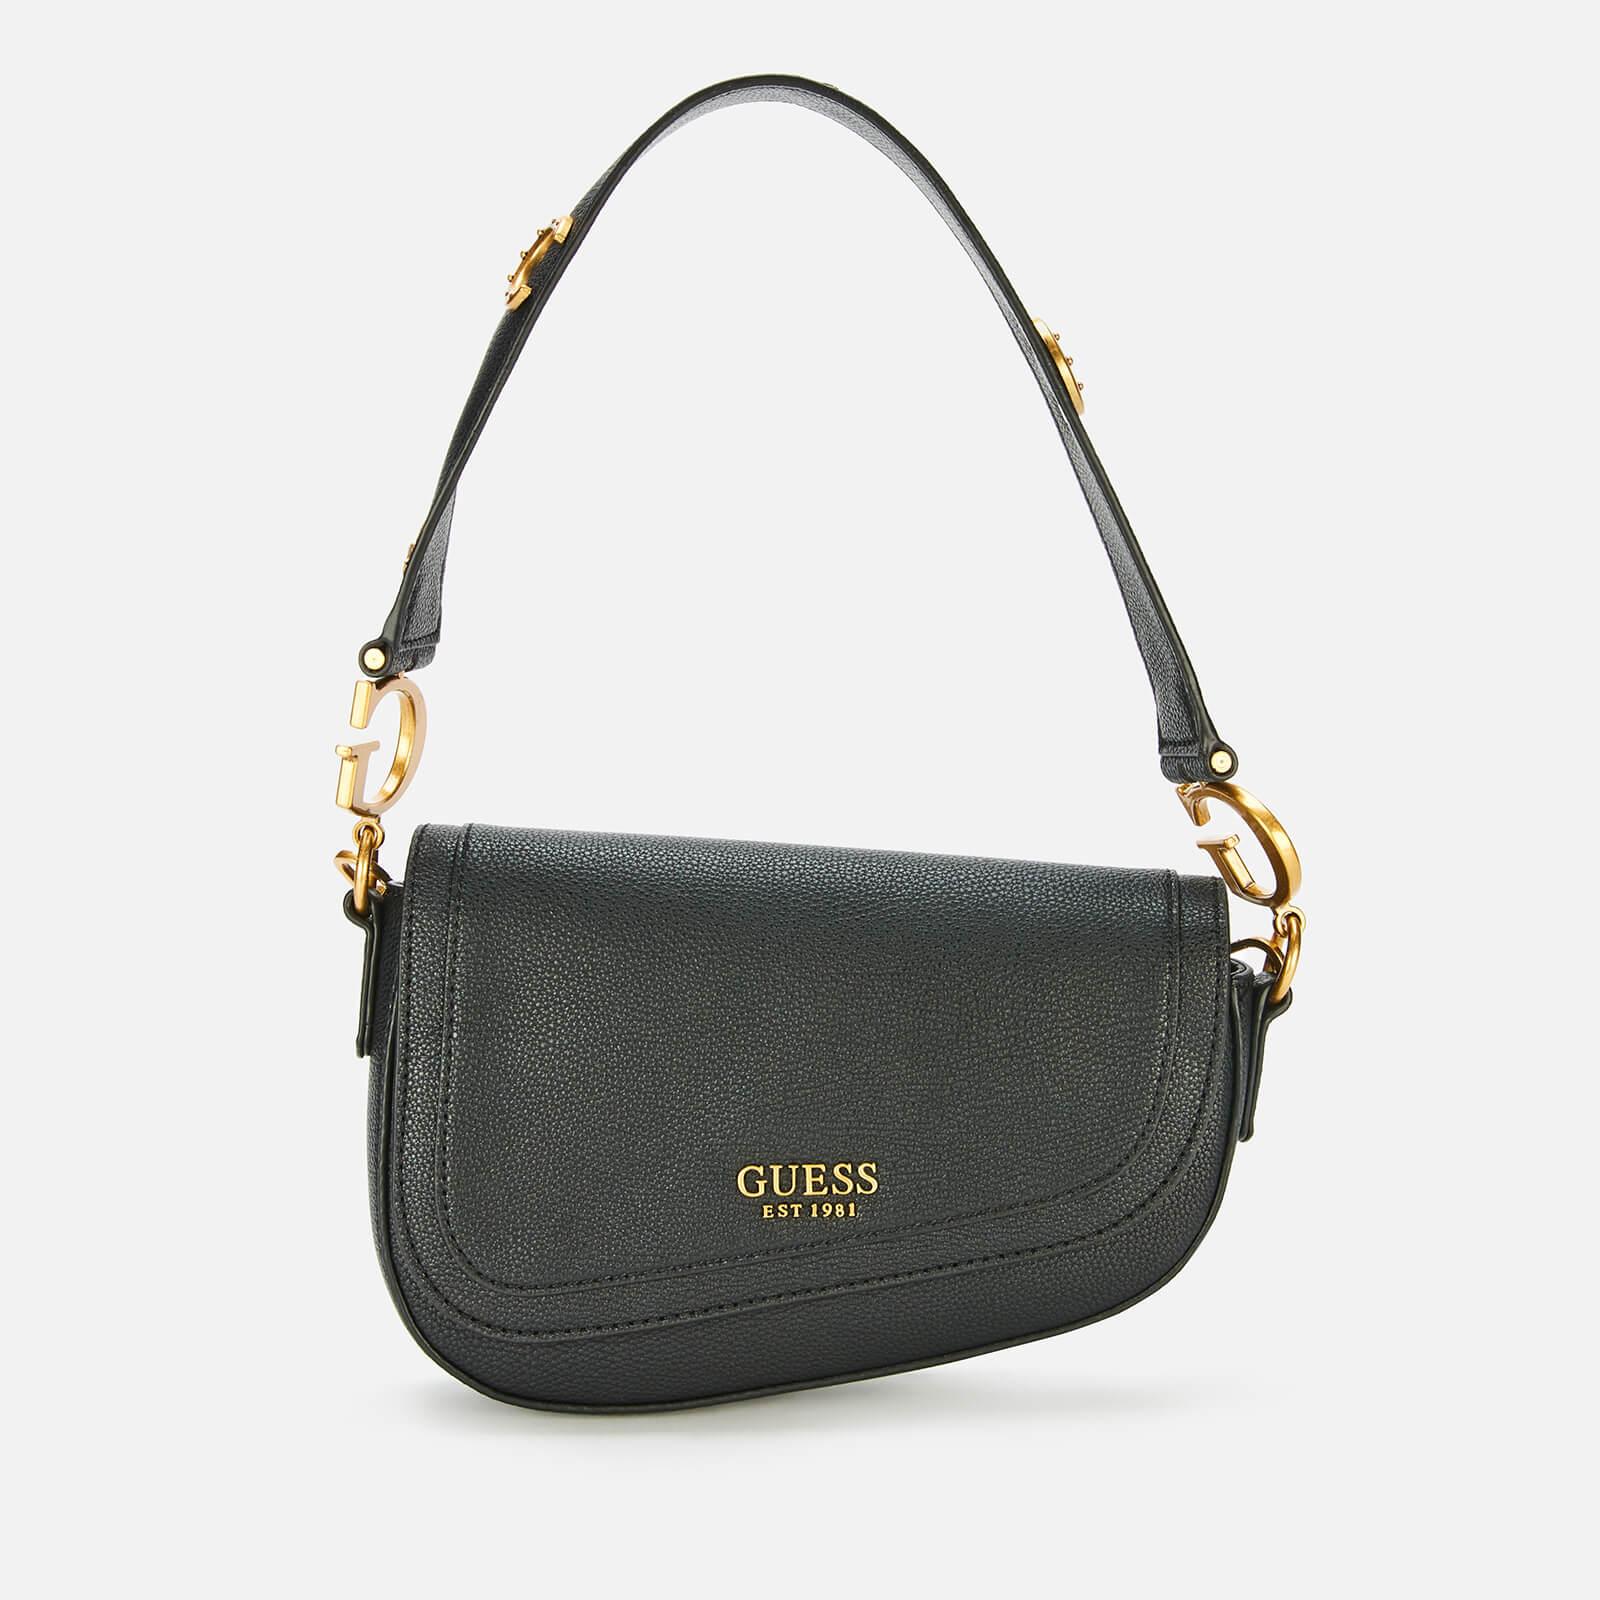 The Guess Bags Of Our Dreams With 40% Off On Cyber ​​Monday 2021